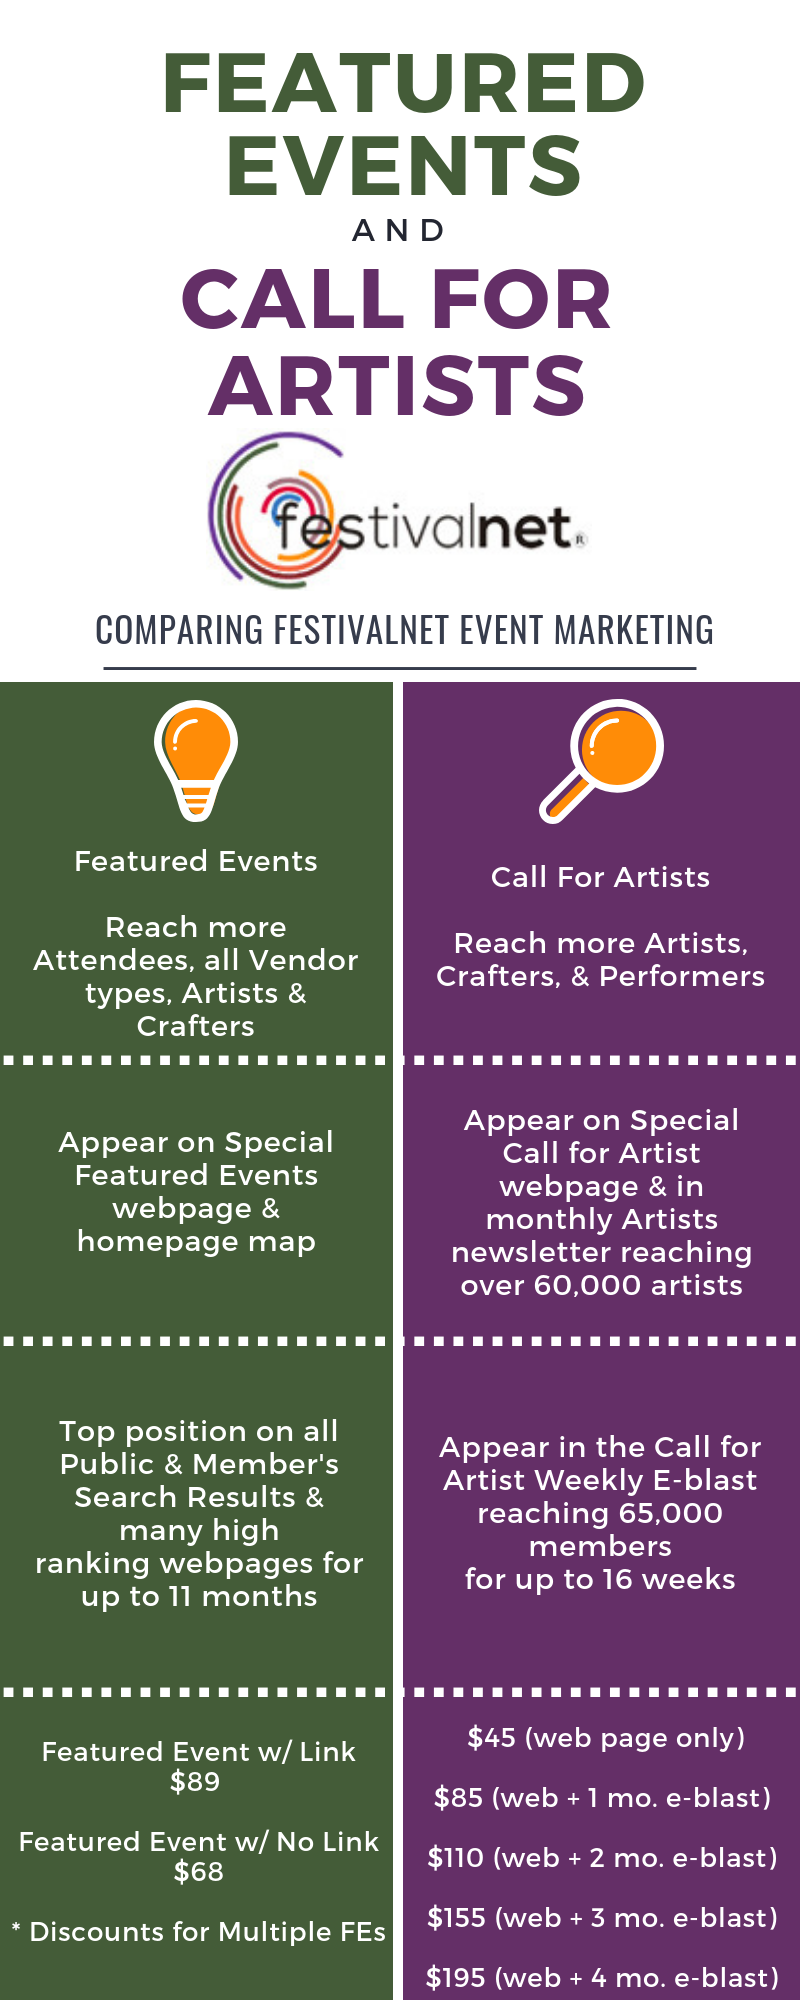 Featured Events and Call for Artists Infographic